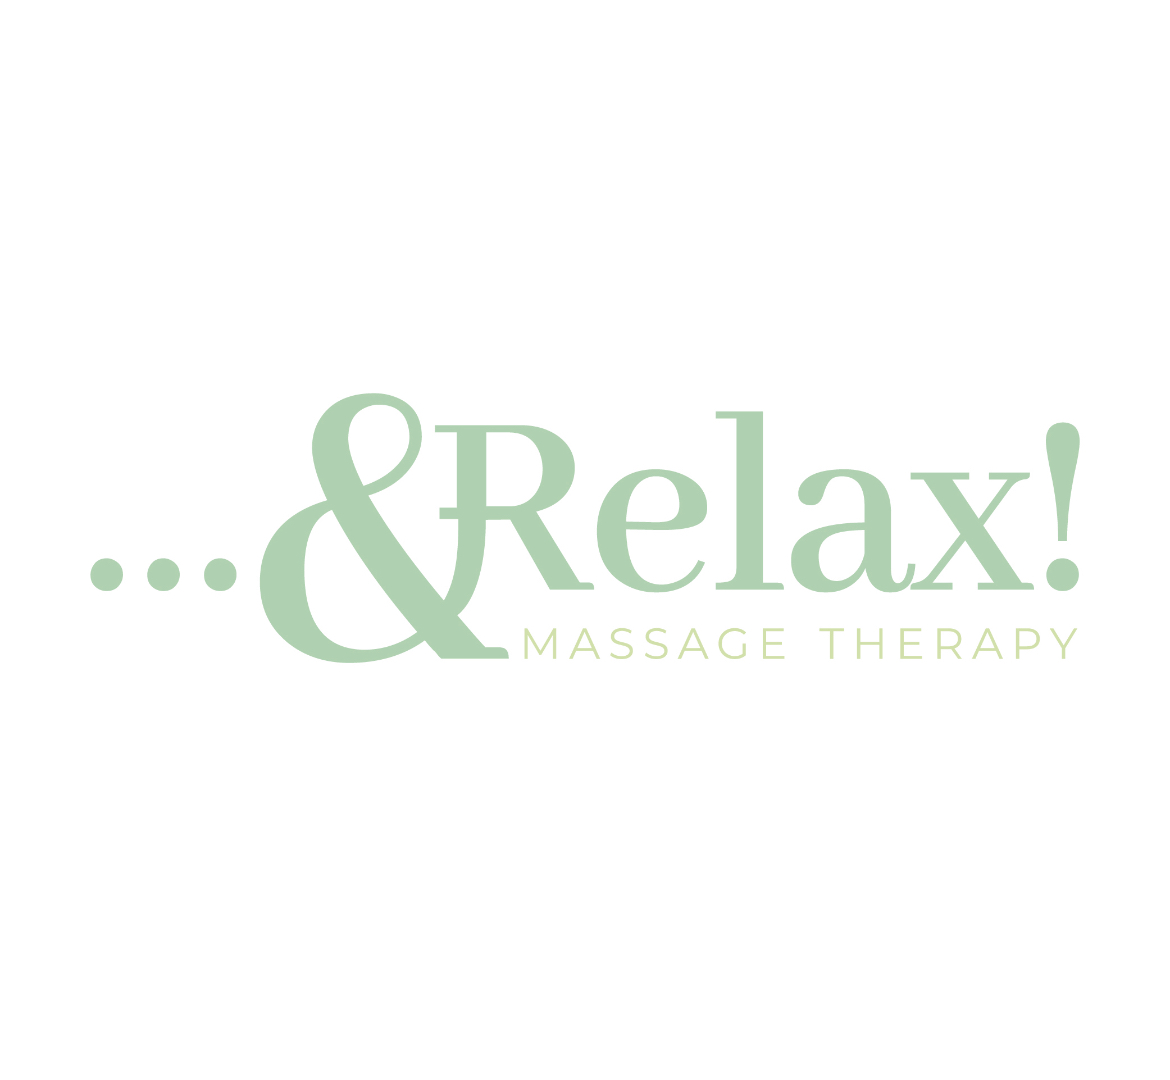 … & Relax! Massage Therapy